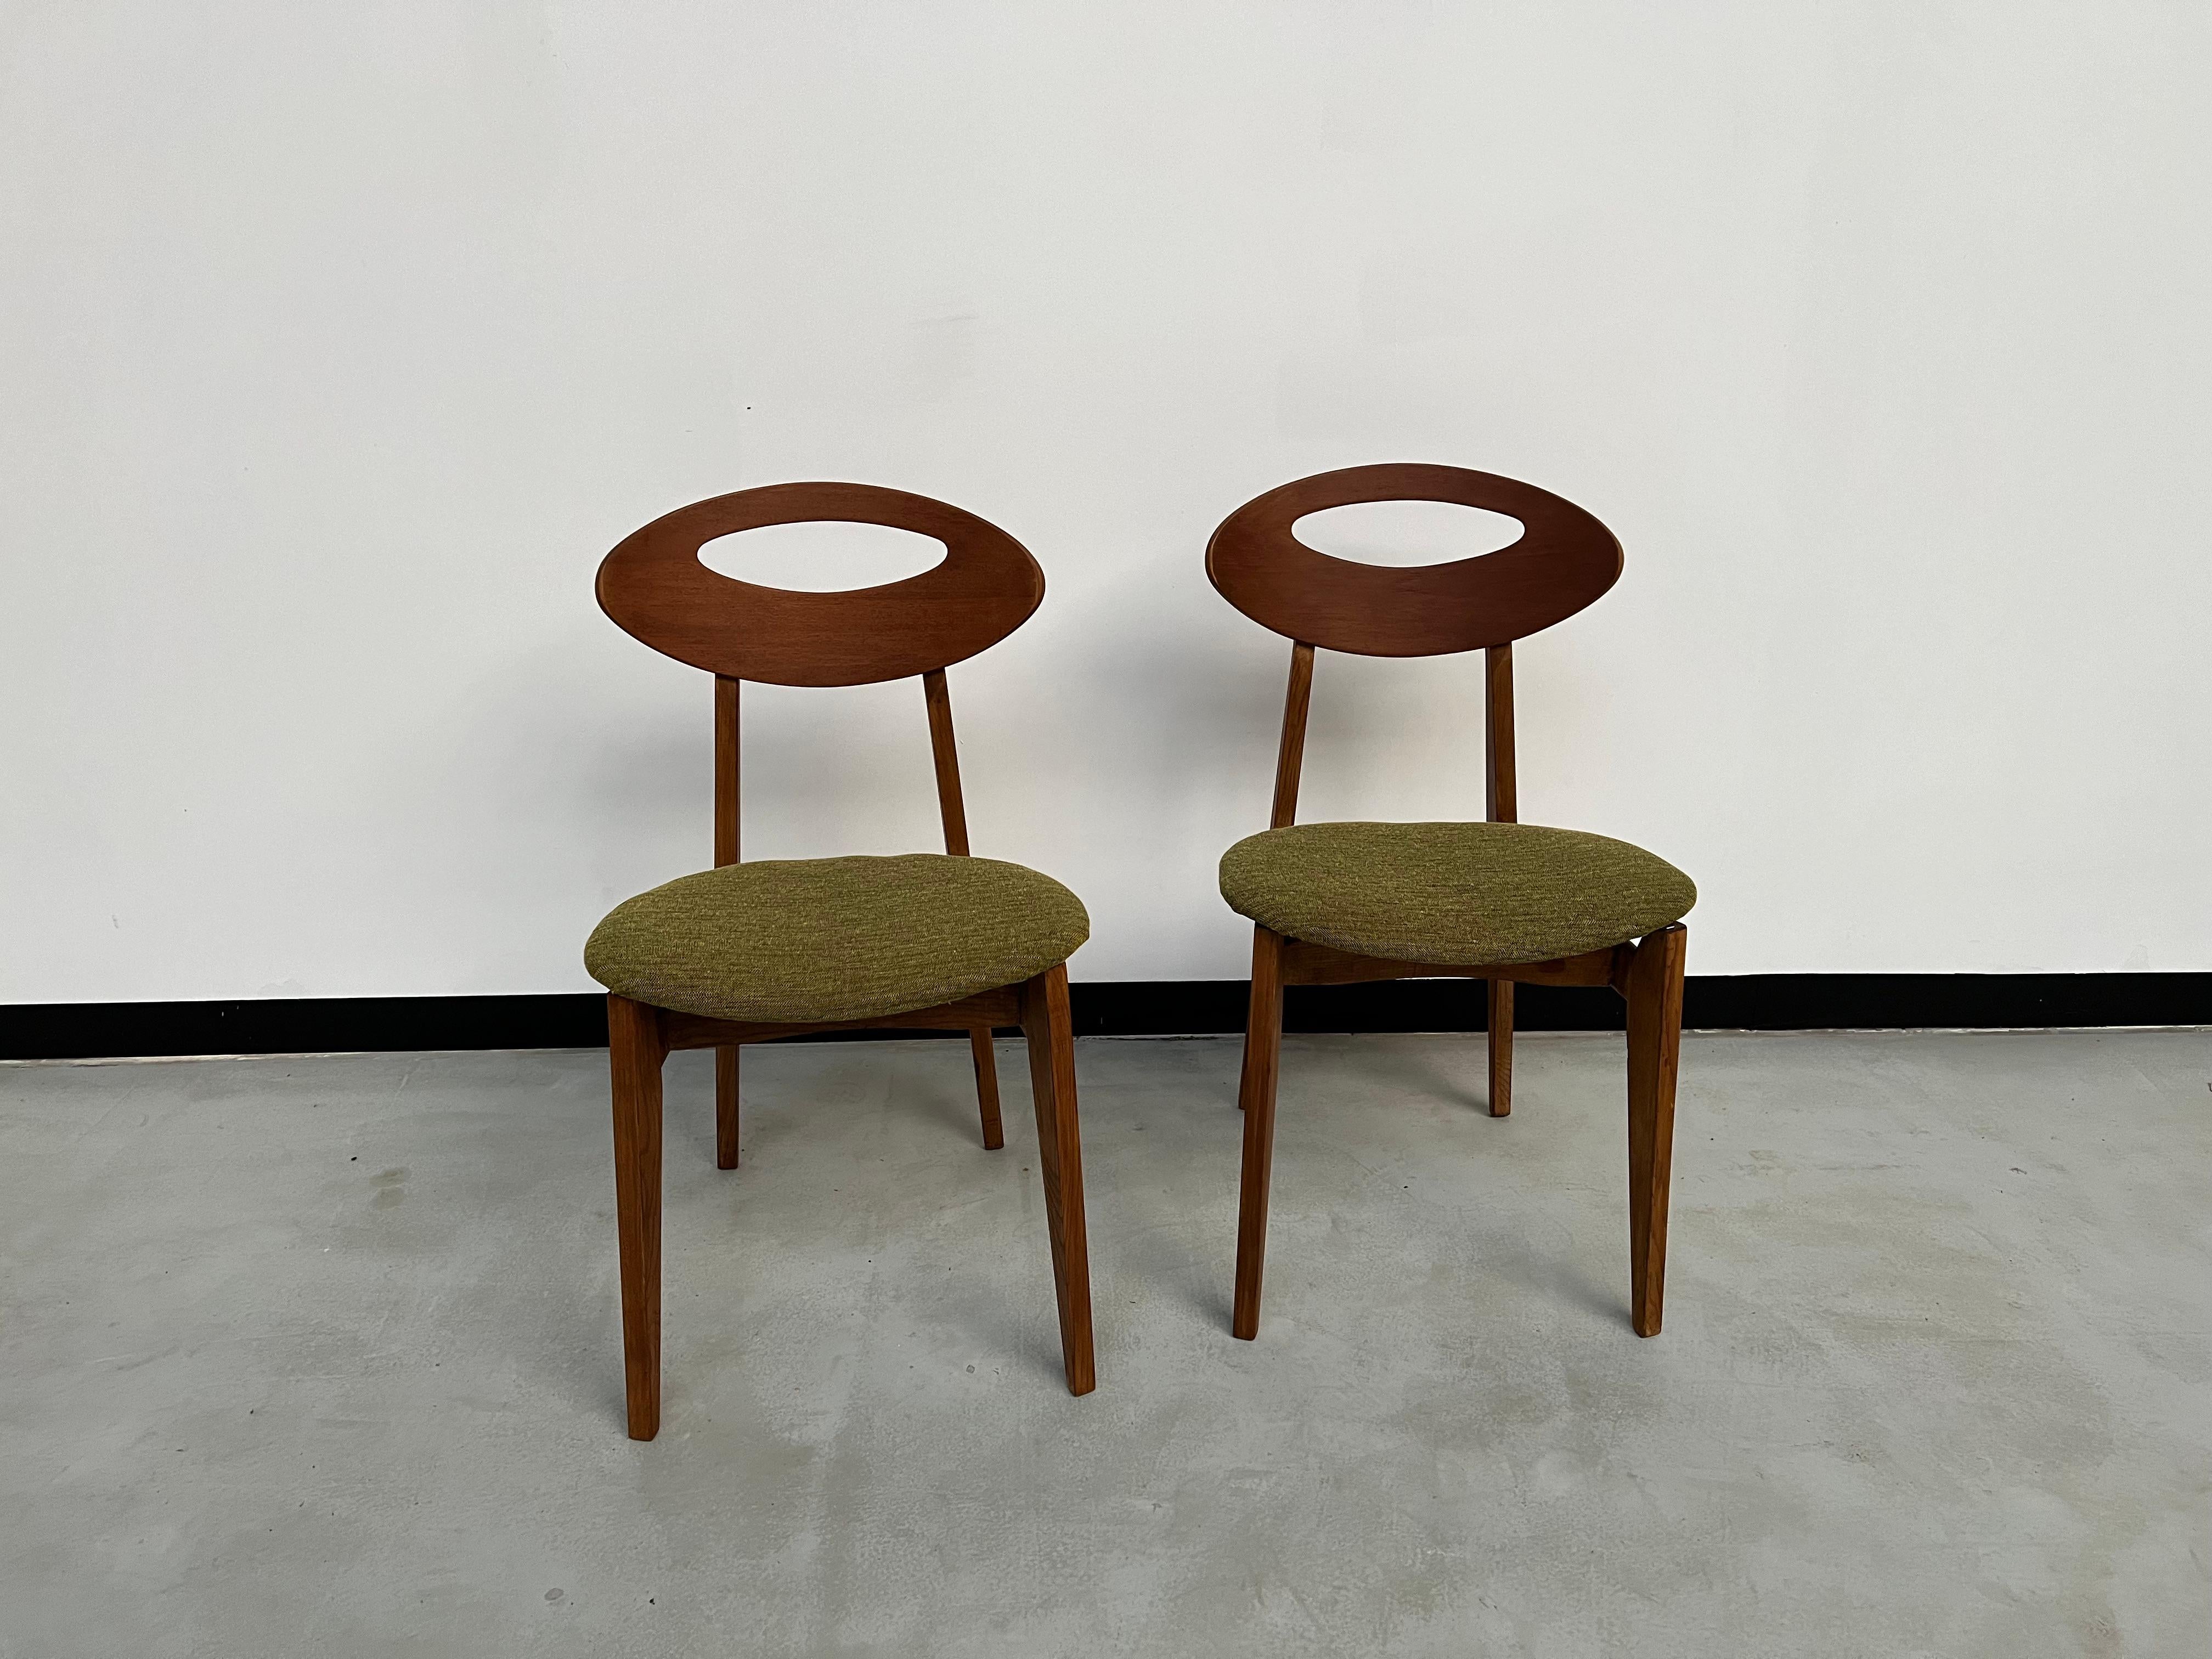 Superb chairs with seats completely restored by Roger Landault (1919-1983). Completely timeless with their modernist lines, they are simply beautiful.

Dimensions: L44 x H80 x D46 cm

Seat height: 45 cm